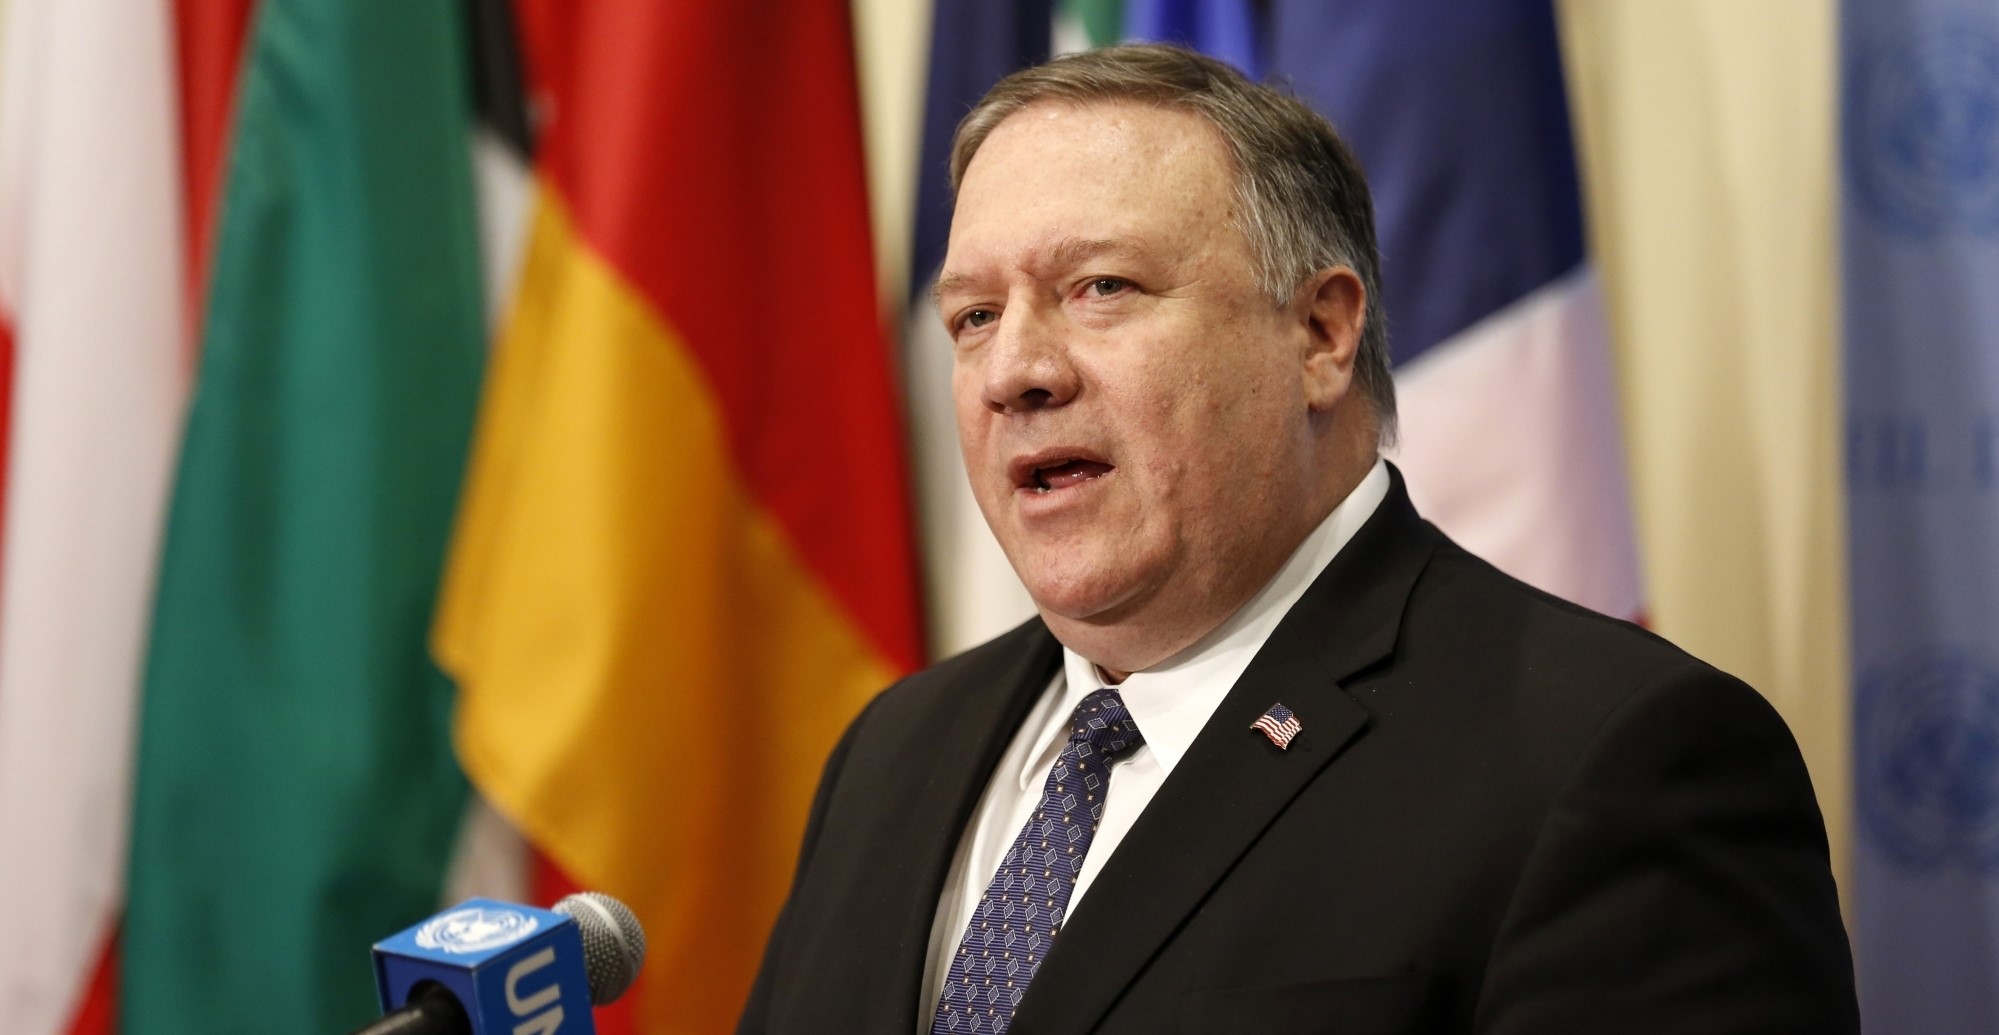 'No evidence' Maduro willing to hold free elections: Pompeo